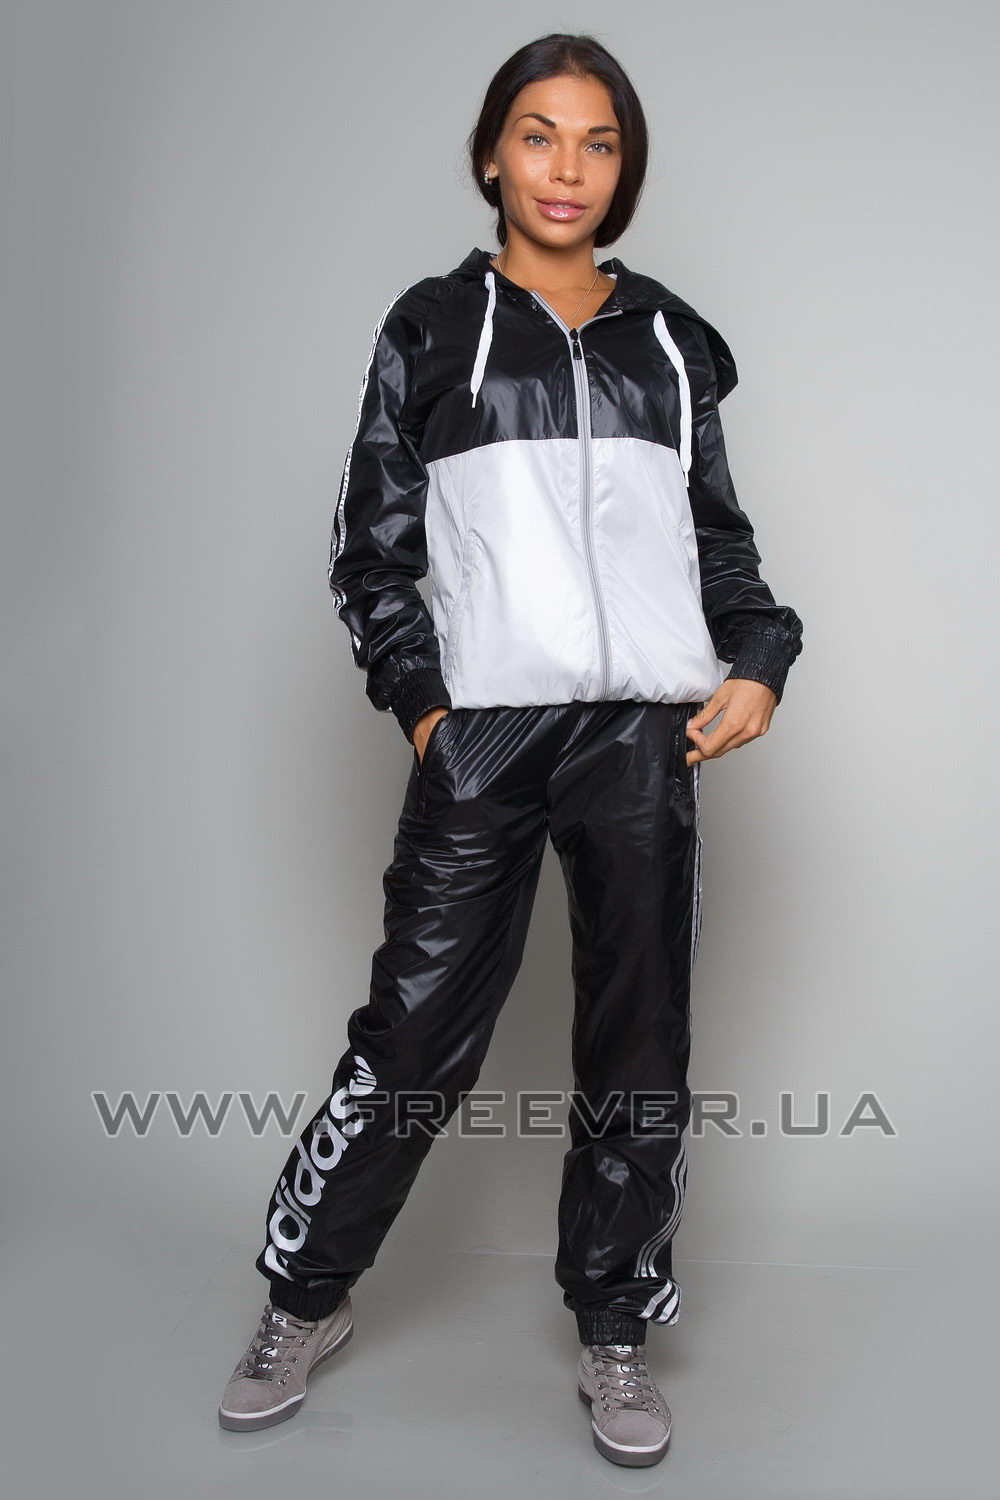 Black and White Shiny Tracksuit from Adidas